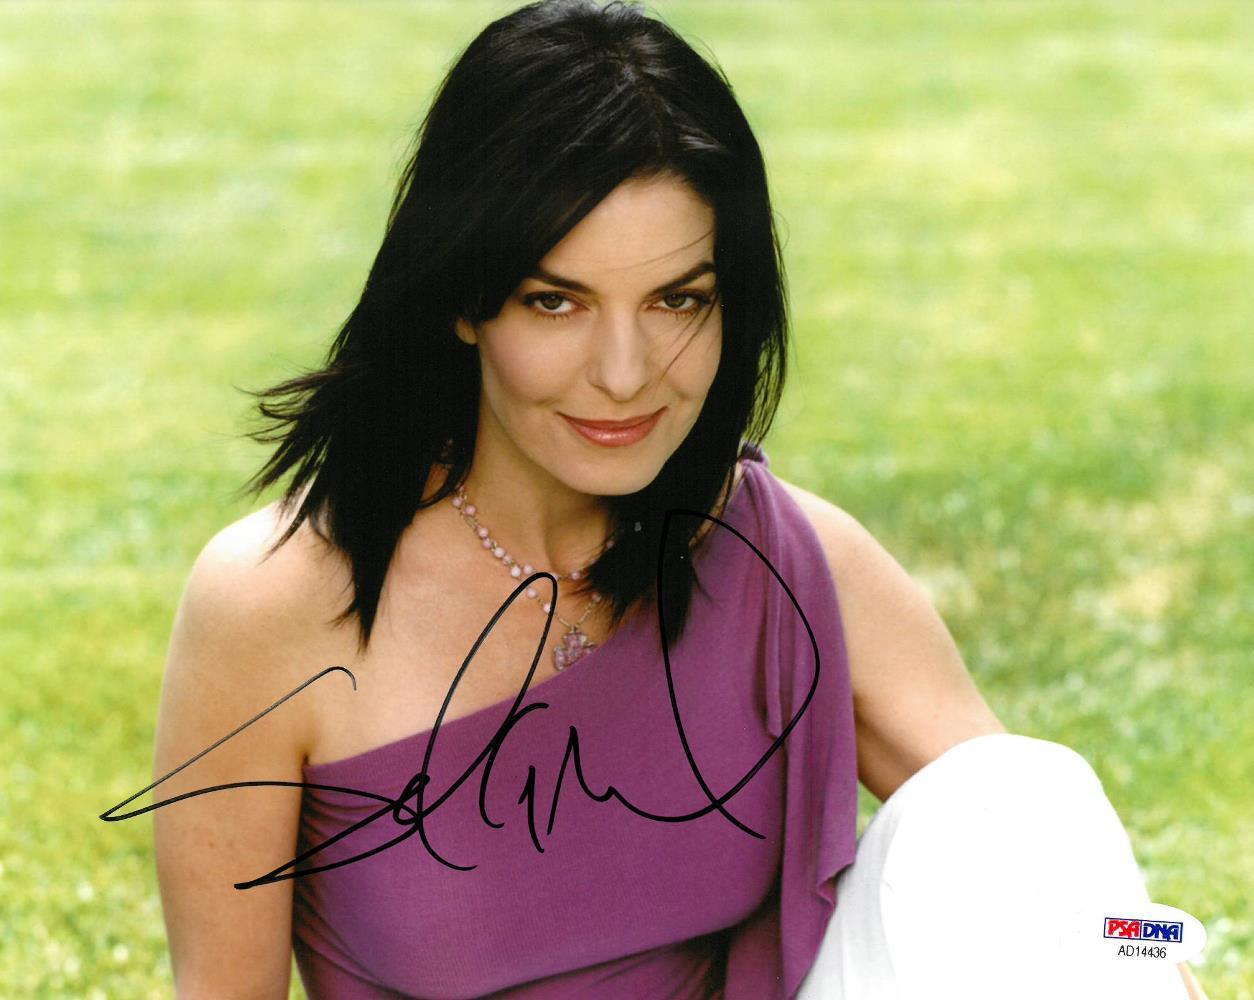 Sela Ward Signed Authentic Autographed 8x10 Photo Poster painting PSA/DNA #AD14436